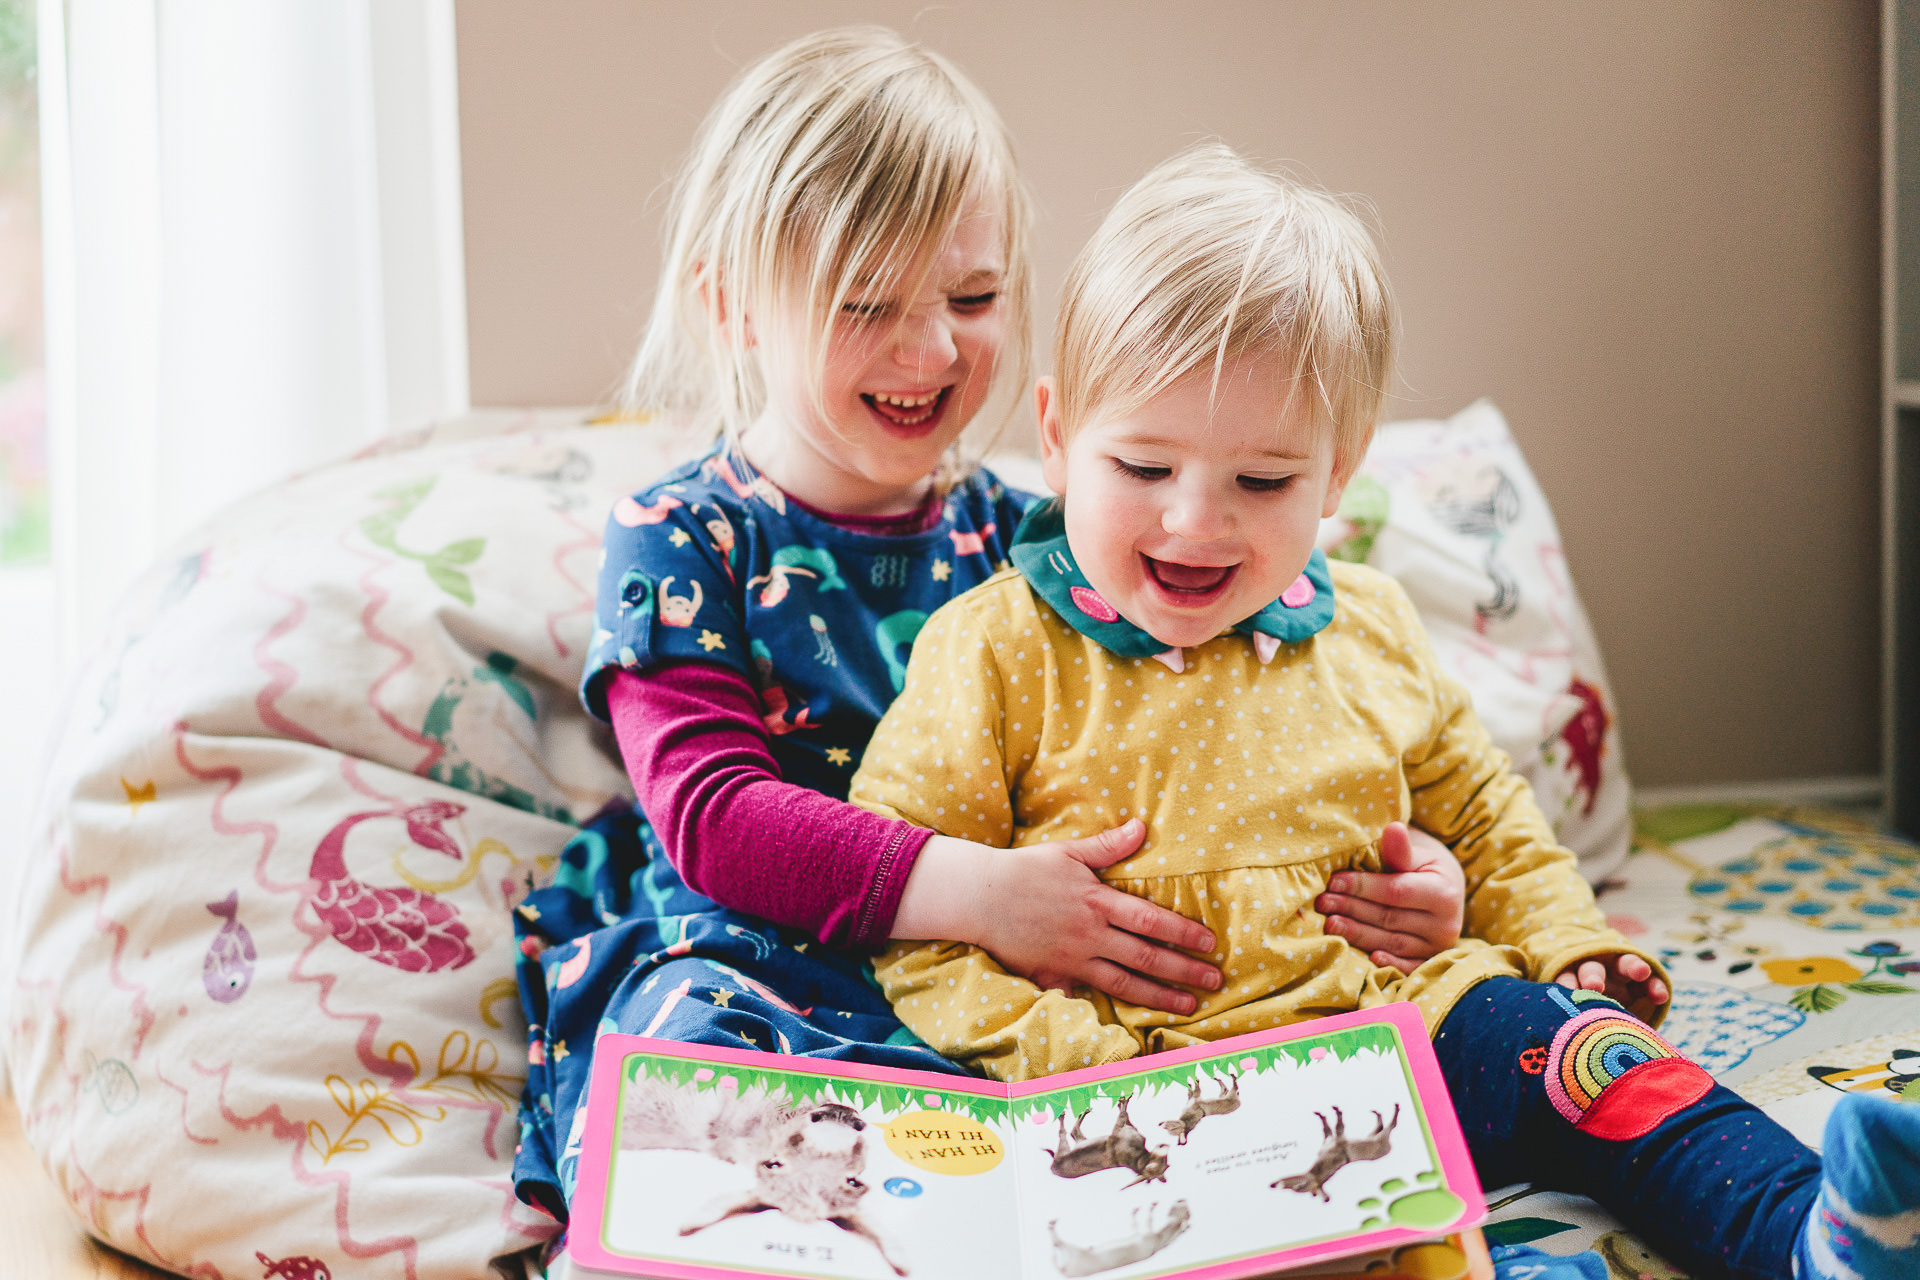 Two sisters laughing at a book together